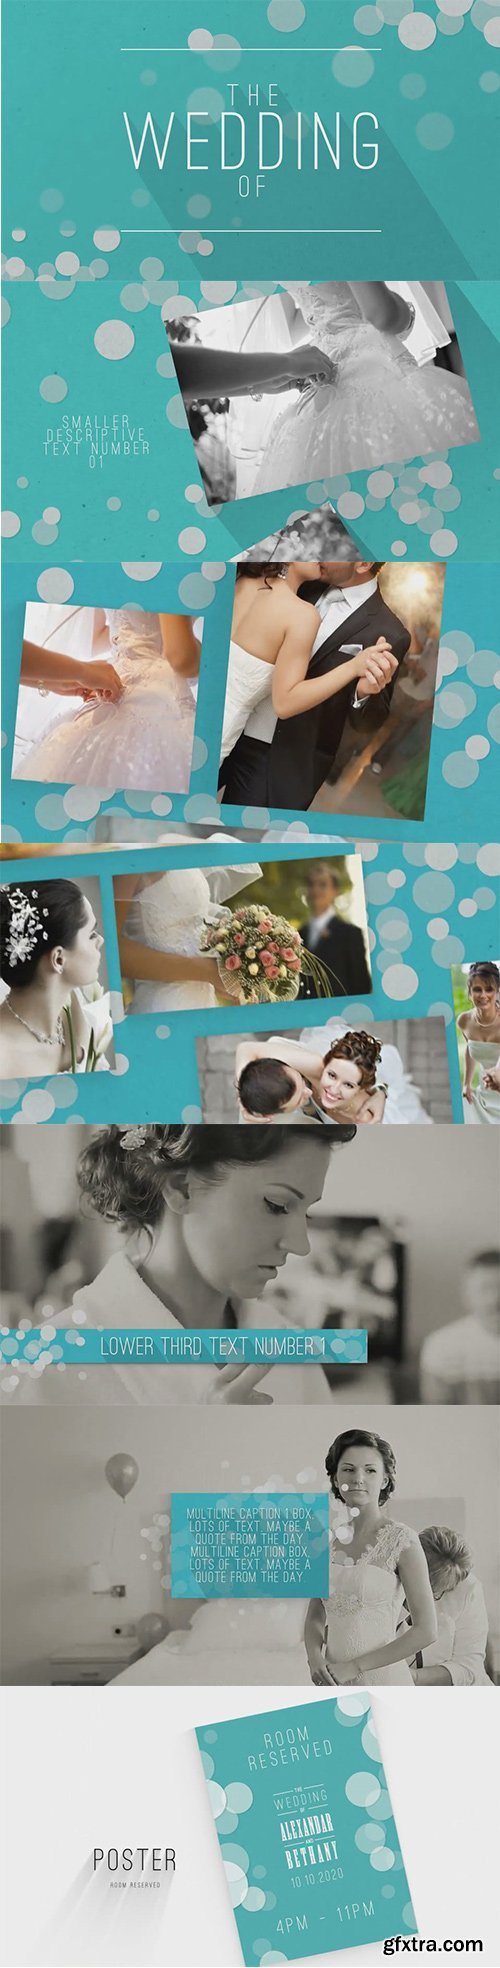 Videohive - 6928975 - Complete Modern Wedding Pack